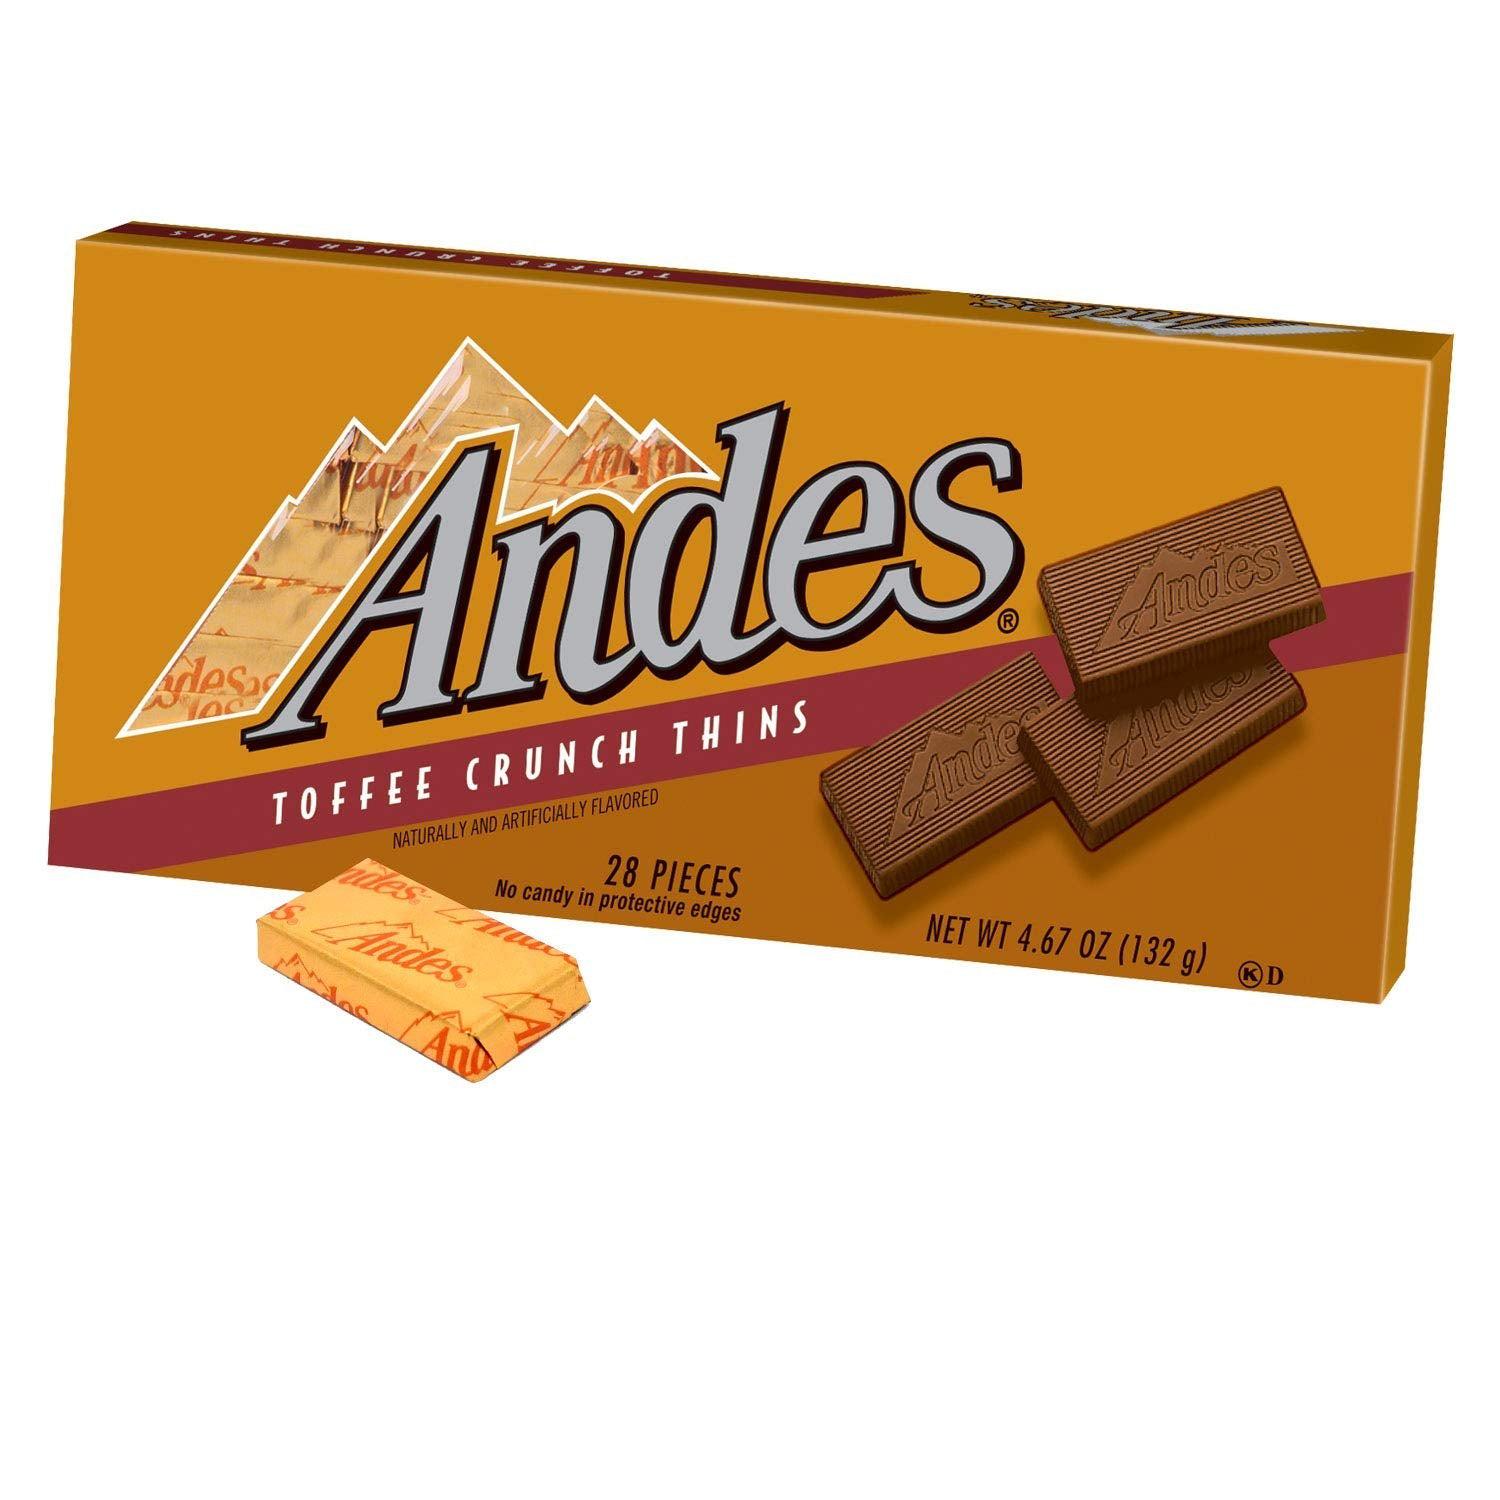 Charms-Andes Toffee Crunch Thins 4.67 oz. Box-15357-Single-Legacy Toys